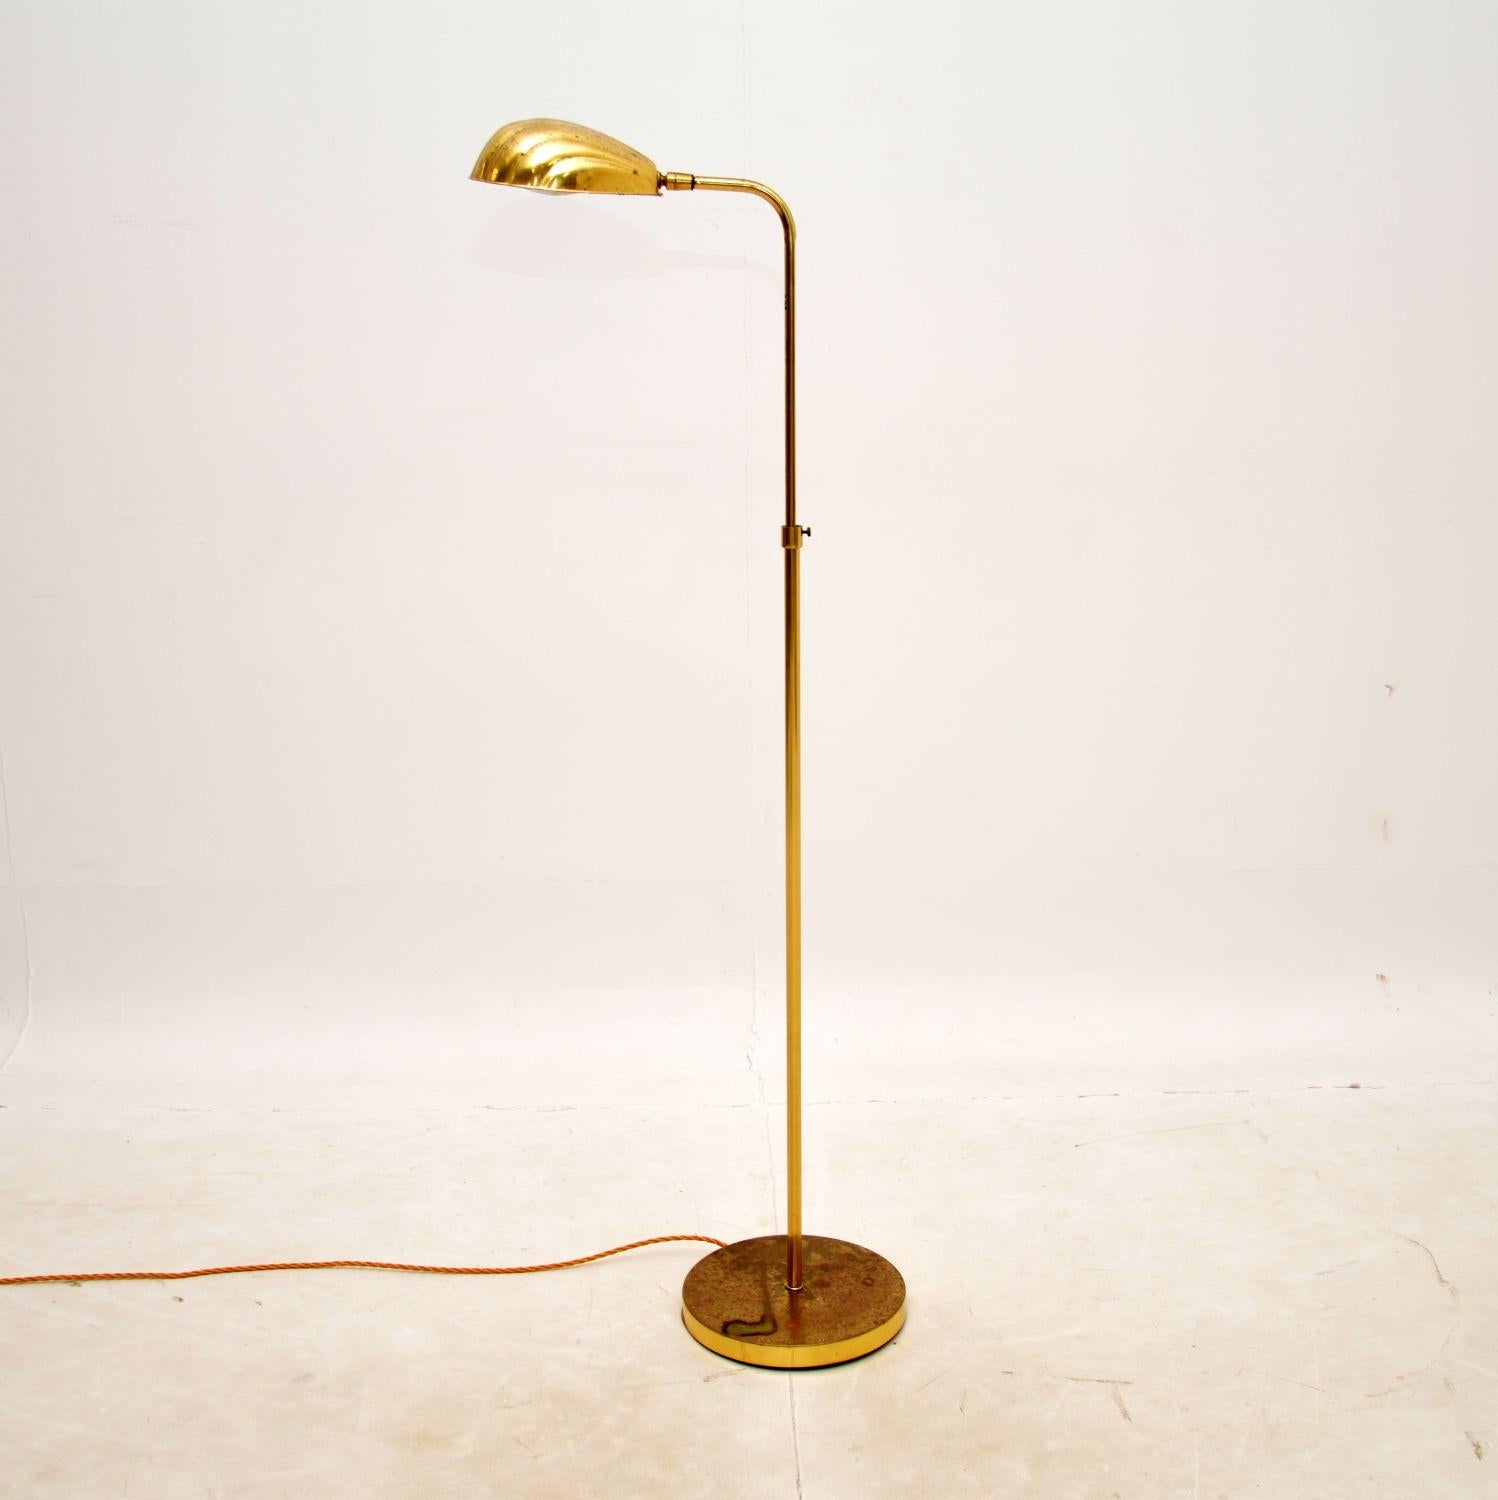 A smart and very well made vintage rise and fall brass floor lamp with a clam shaped shade. This was made in England, it dates from the 1970s.
It is of lovely quality and is a very useful Size. The height can be adjusted, and even at its highest it